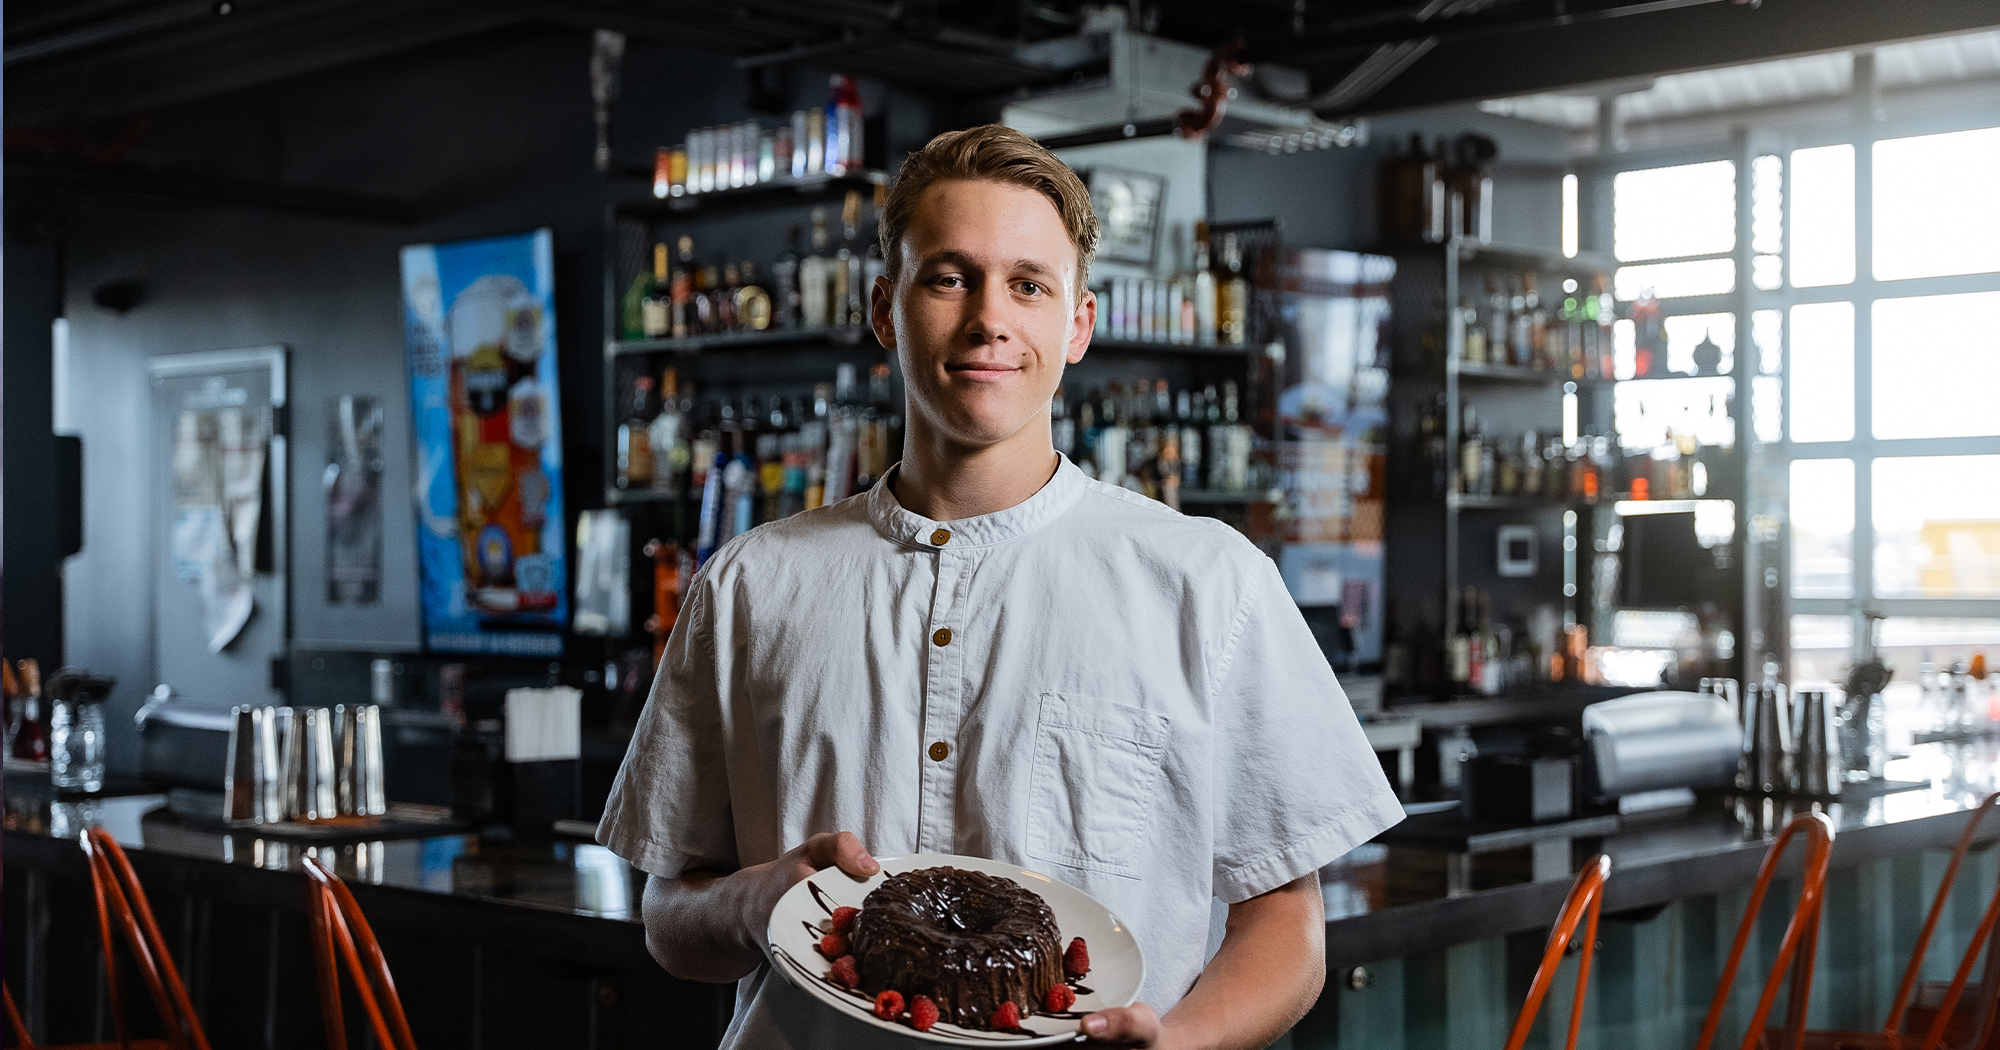 Male Wyoming apprentice holds a plated cake